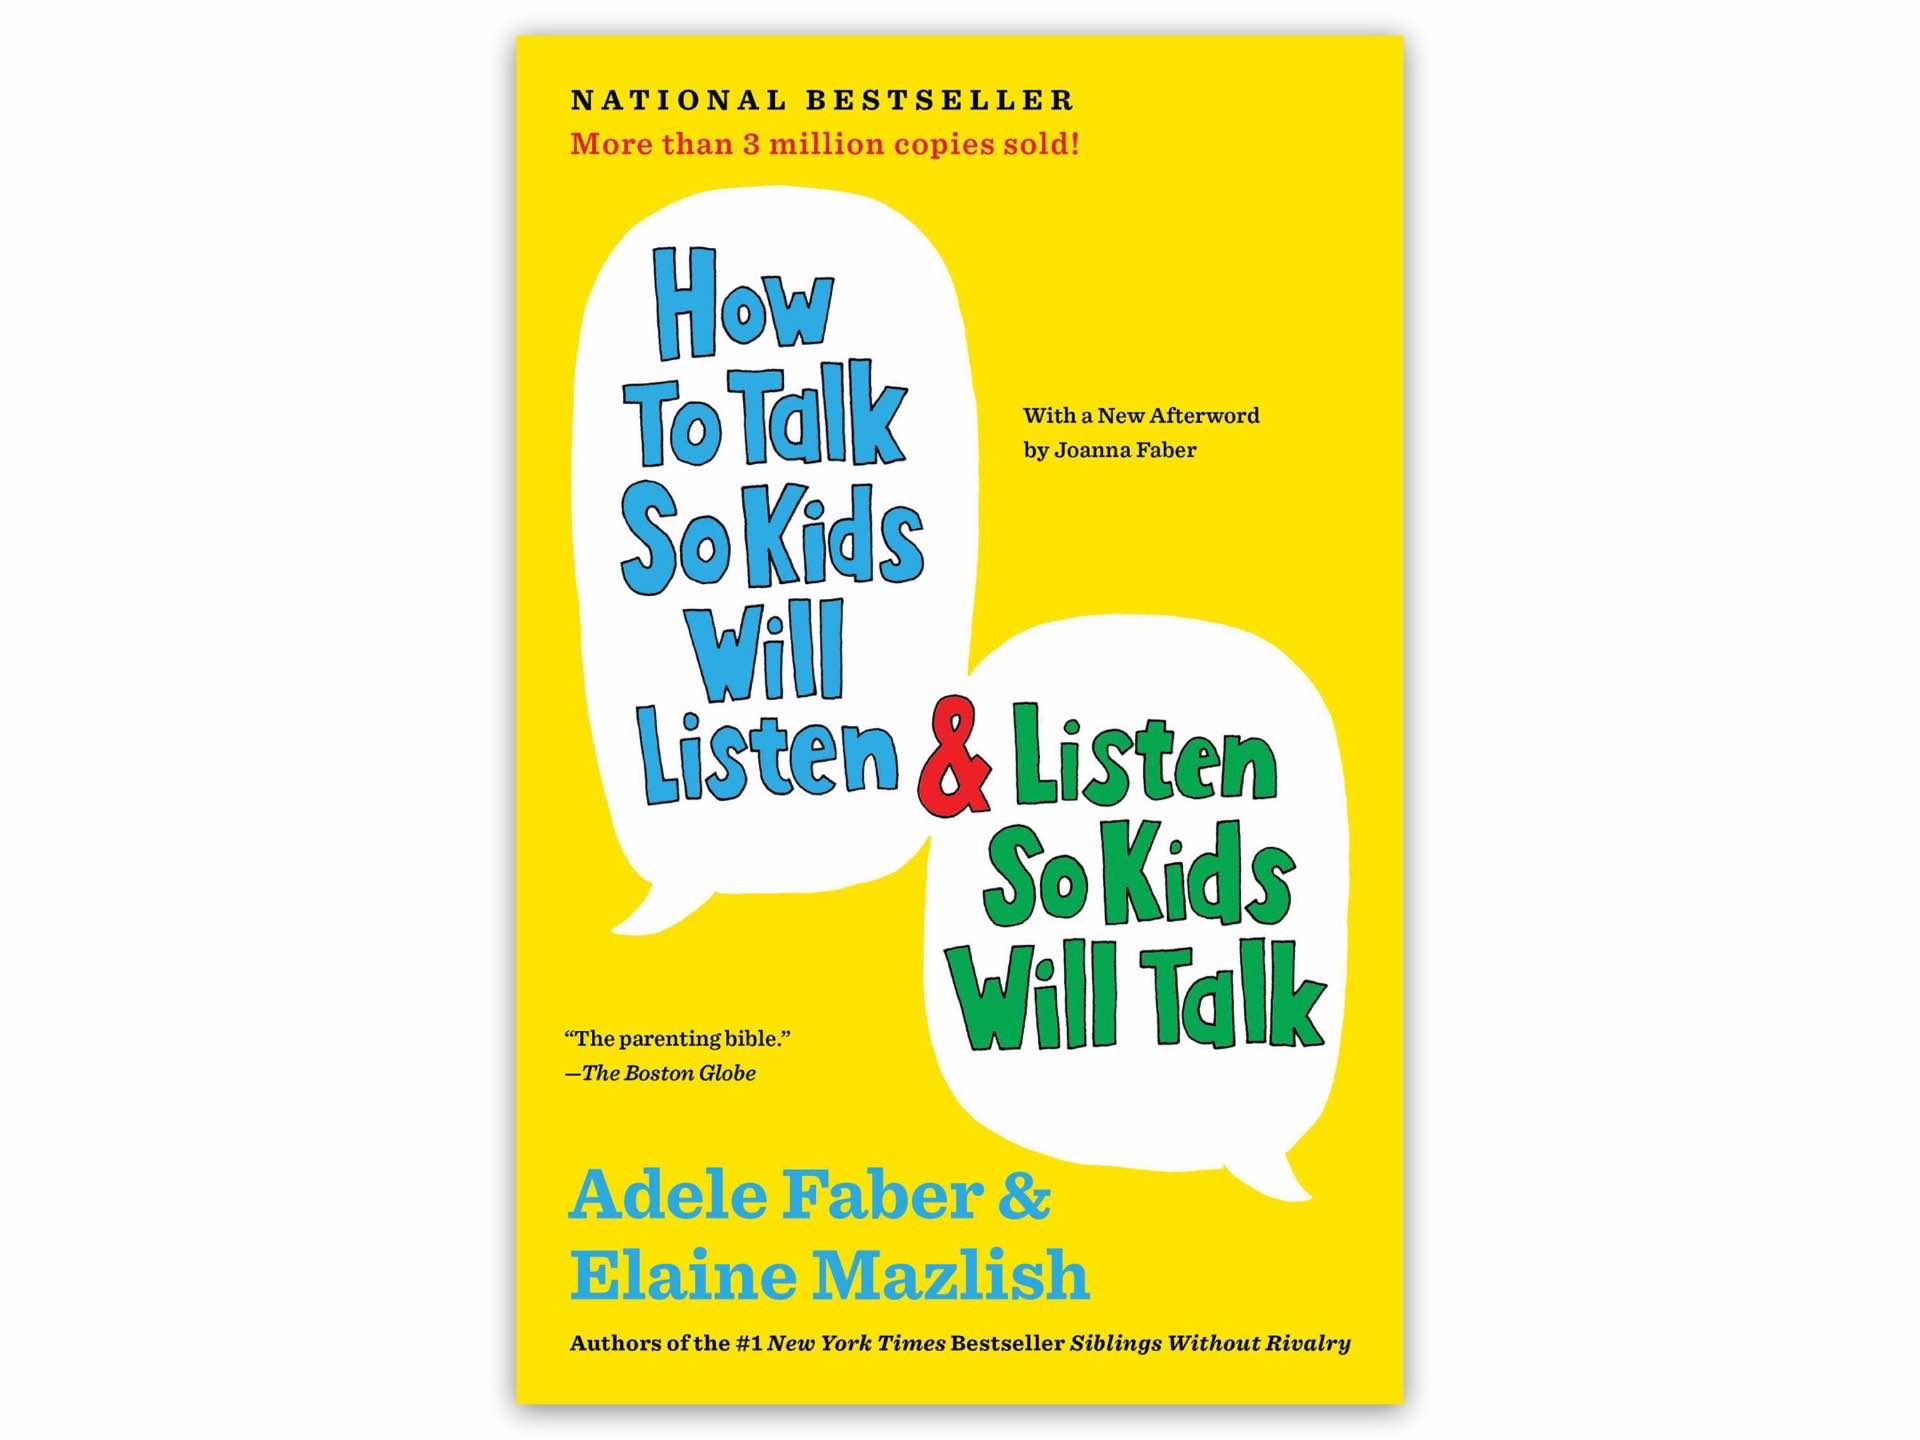 how-to-talk-so-kids-will-listen-by-adele-faber-and-elaine-mazlish